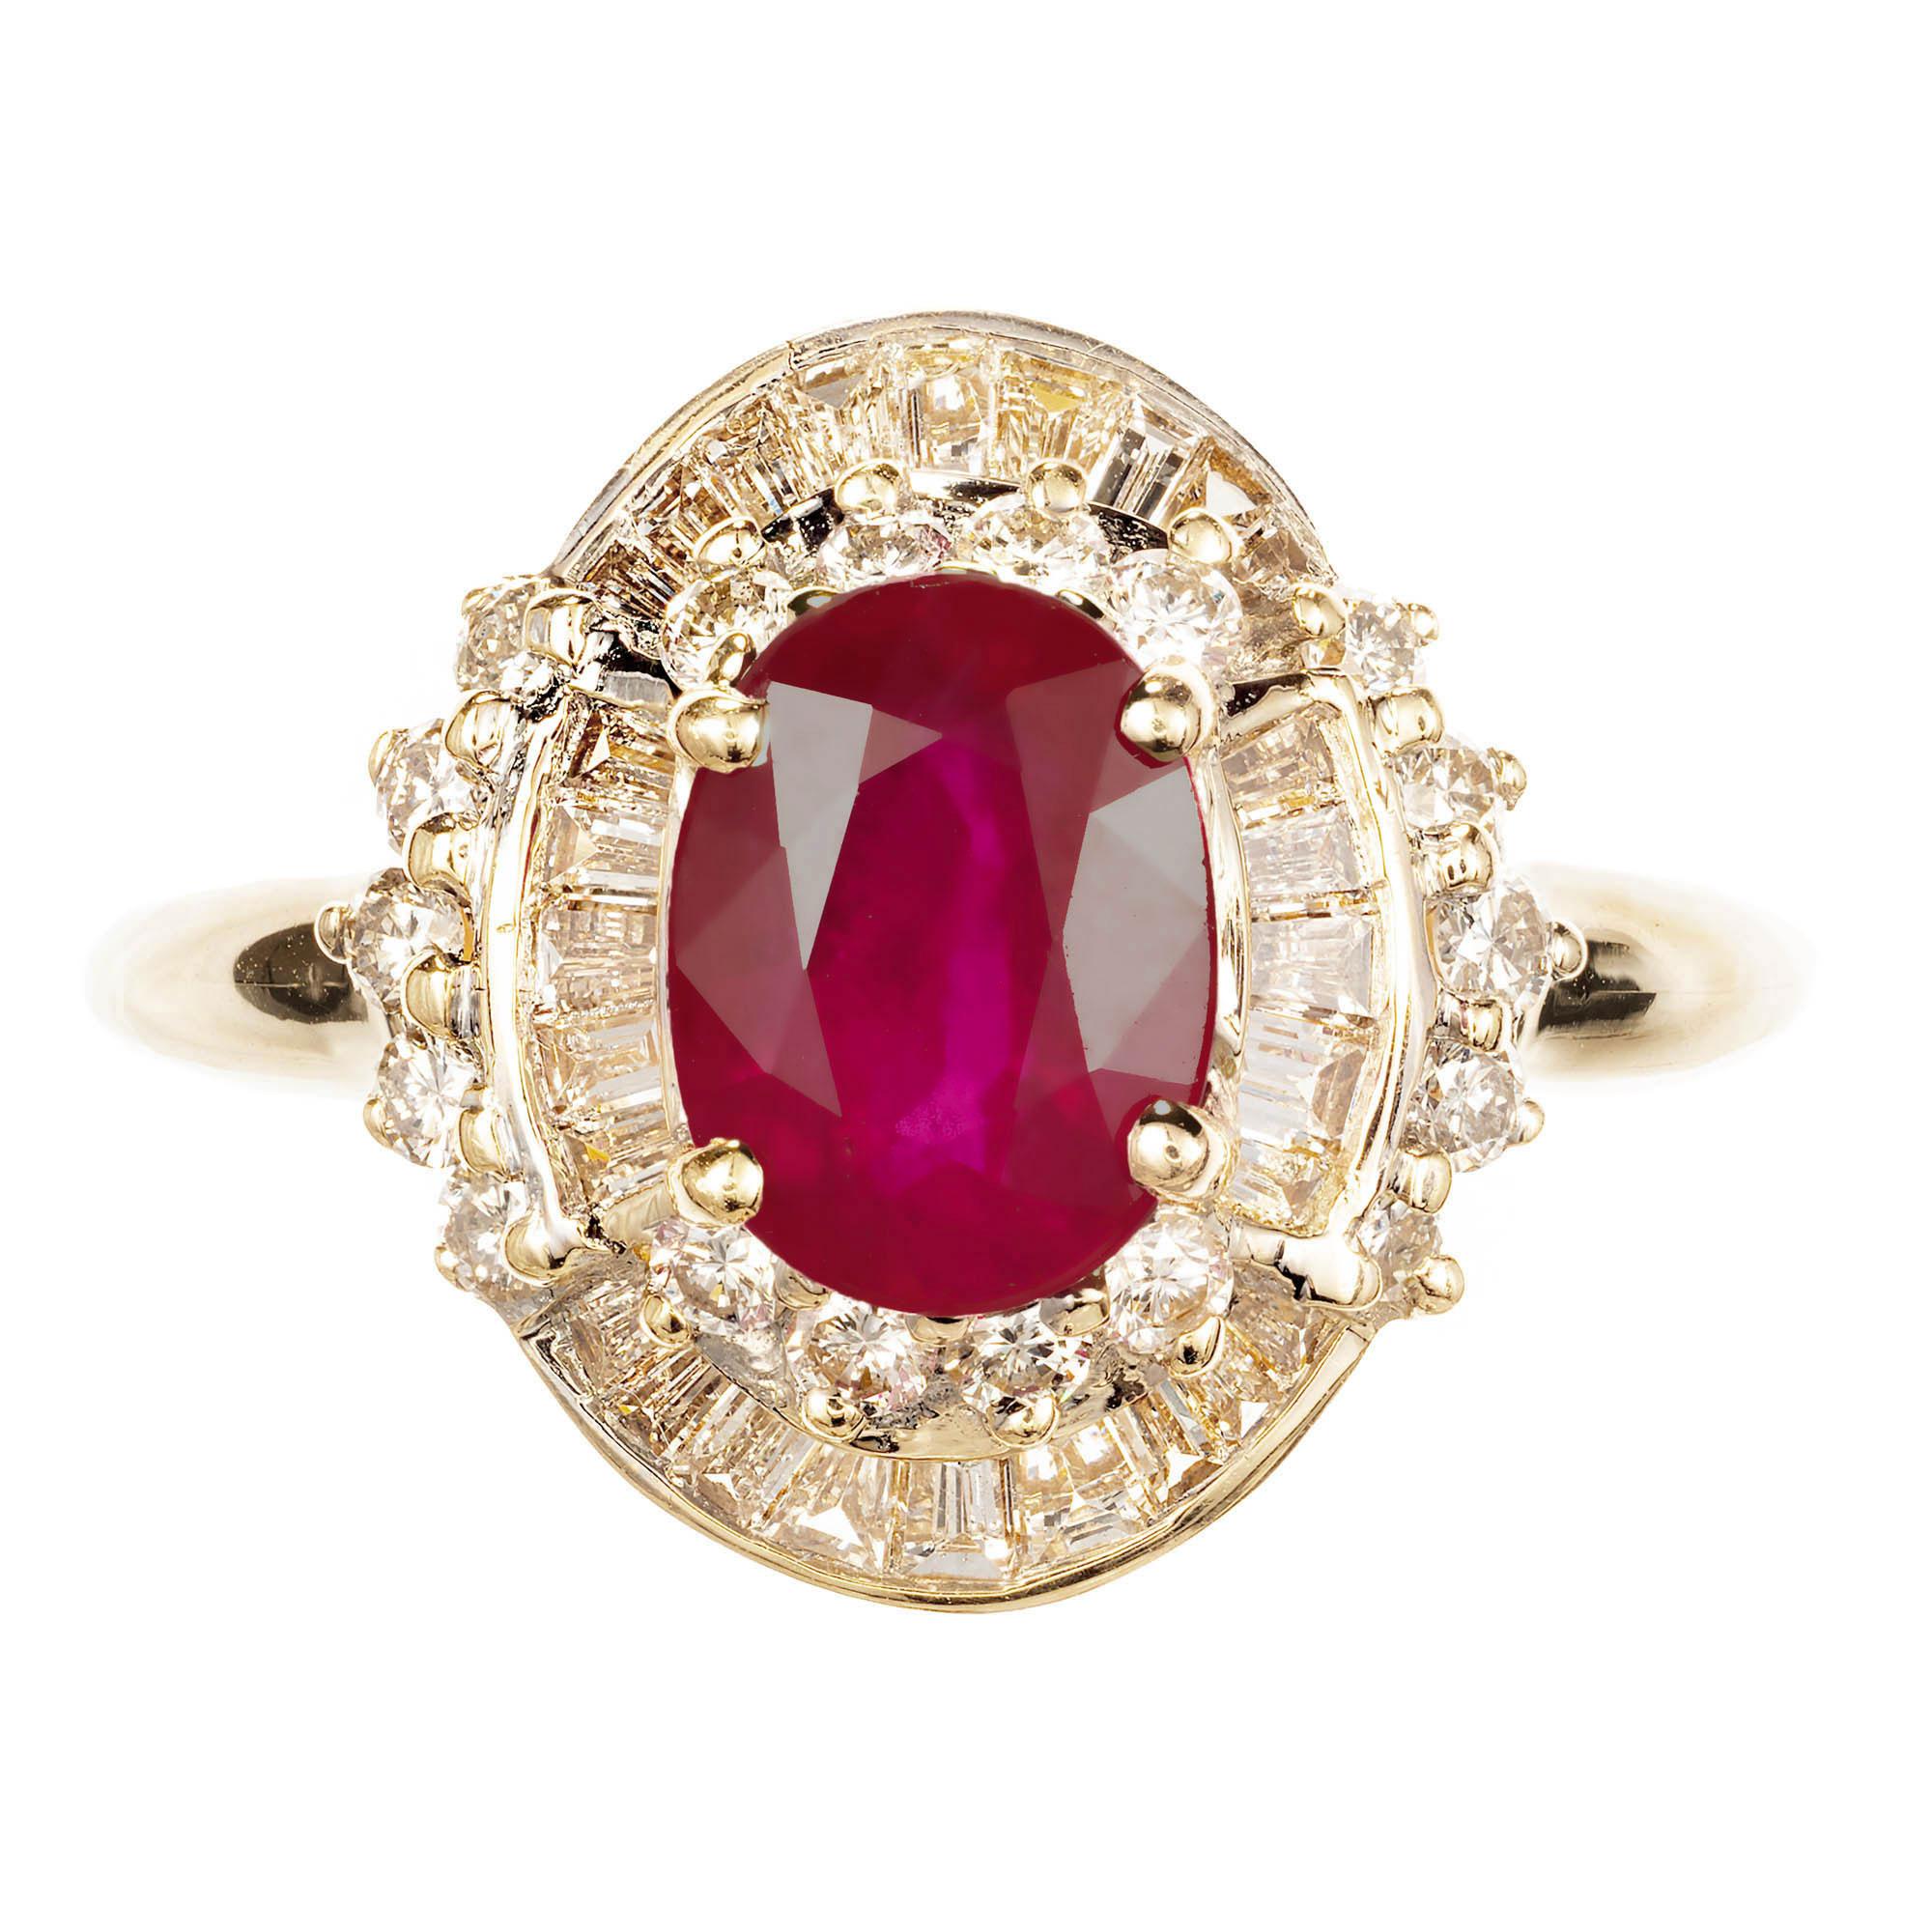 Ruby and Diamond engagement Ring. Oval Ruby set in 14k yellow gold high above 2 rows of alternating round brilliant cut Diamonds and tapered baguette Diamonds set in 14k white gold on a yellow gold shank.

1 oval red Ruby, approx. total weight